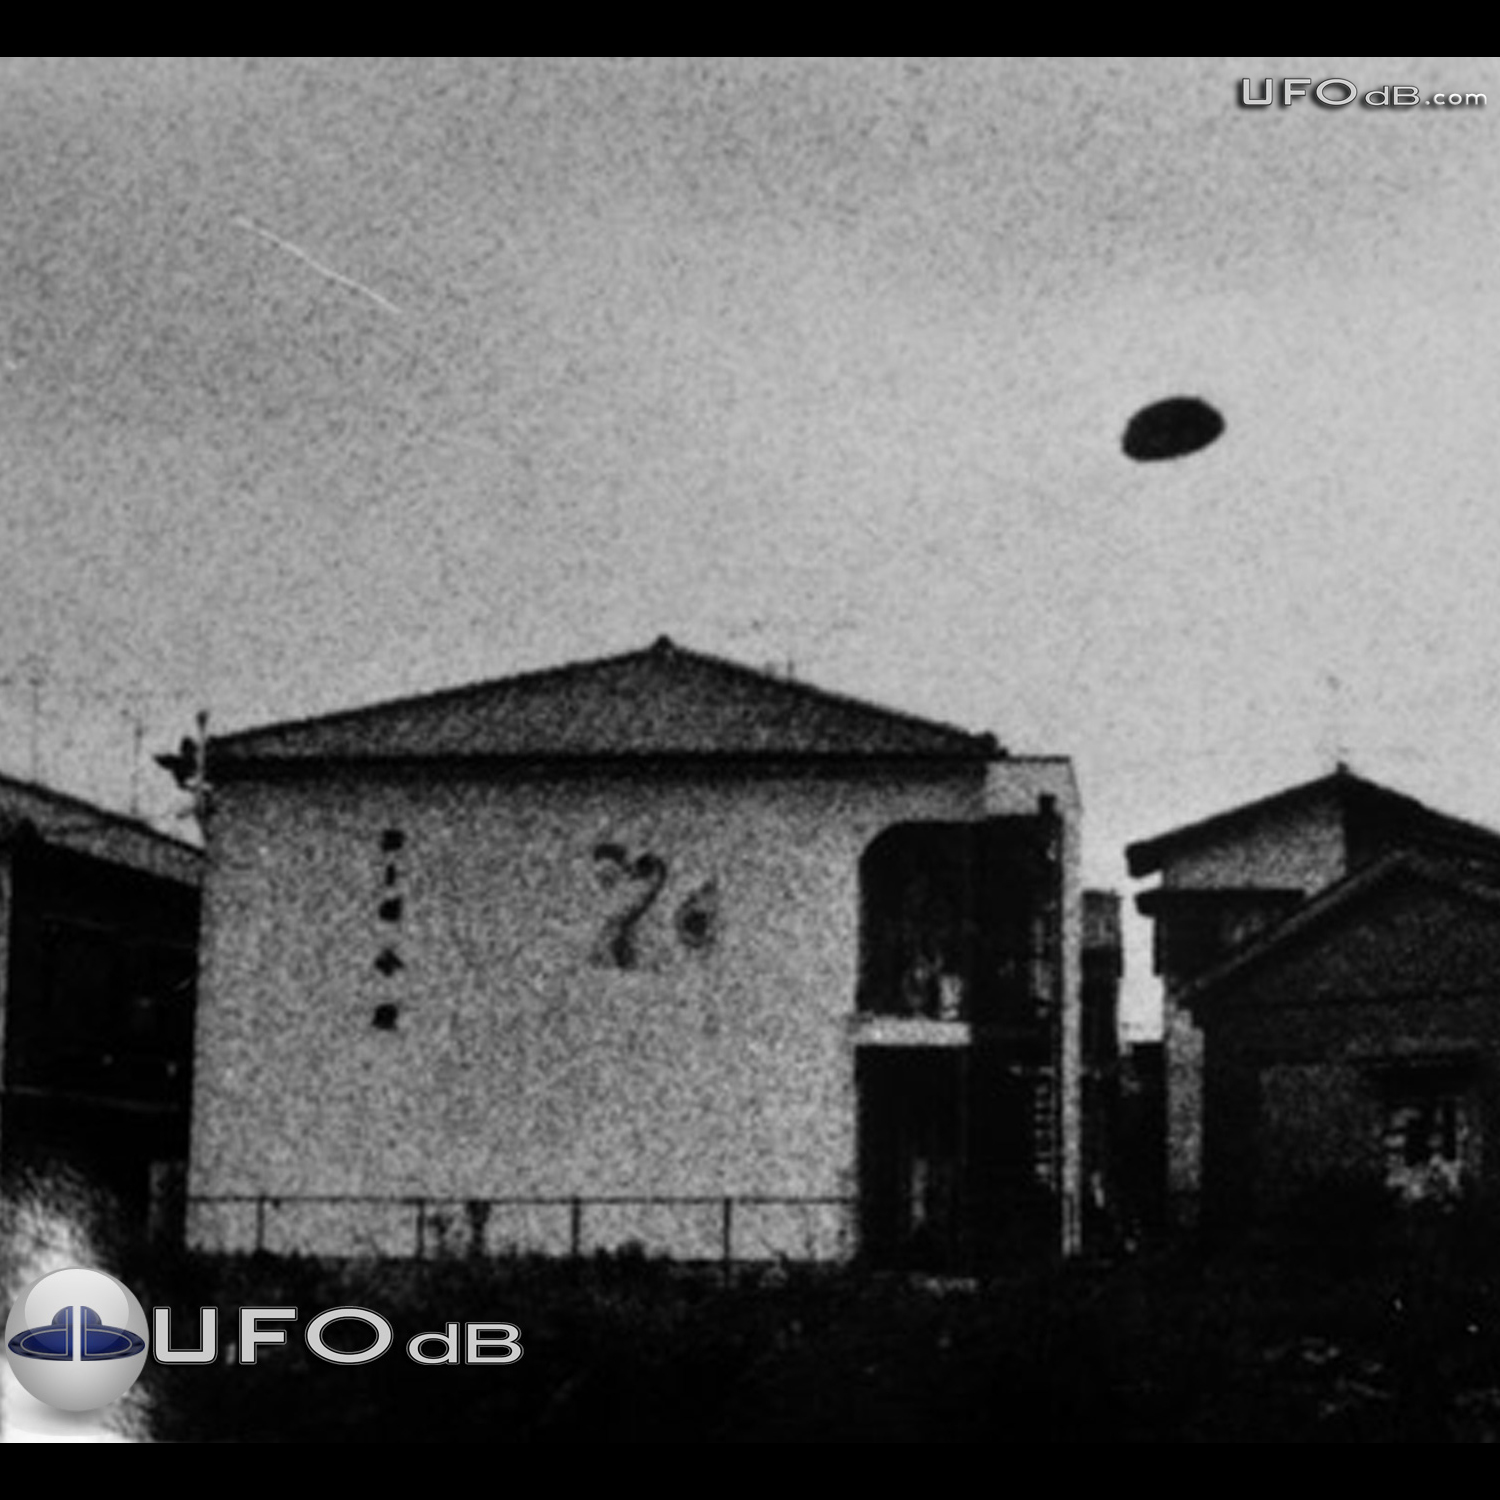 Japan University student shoot picture of UFO passing over his house UFO Picture #353-1